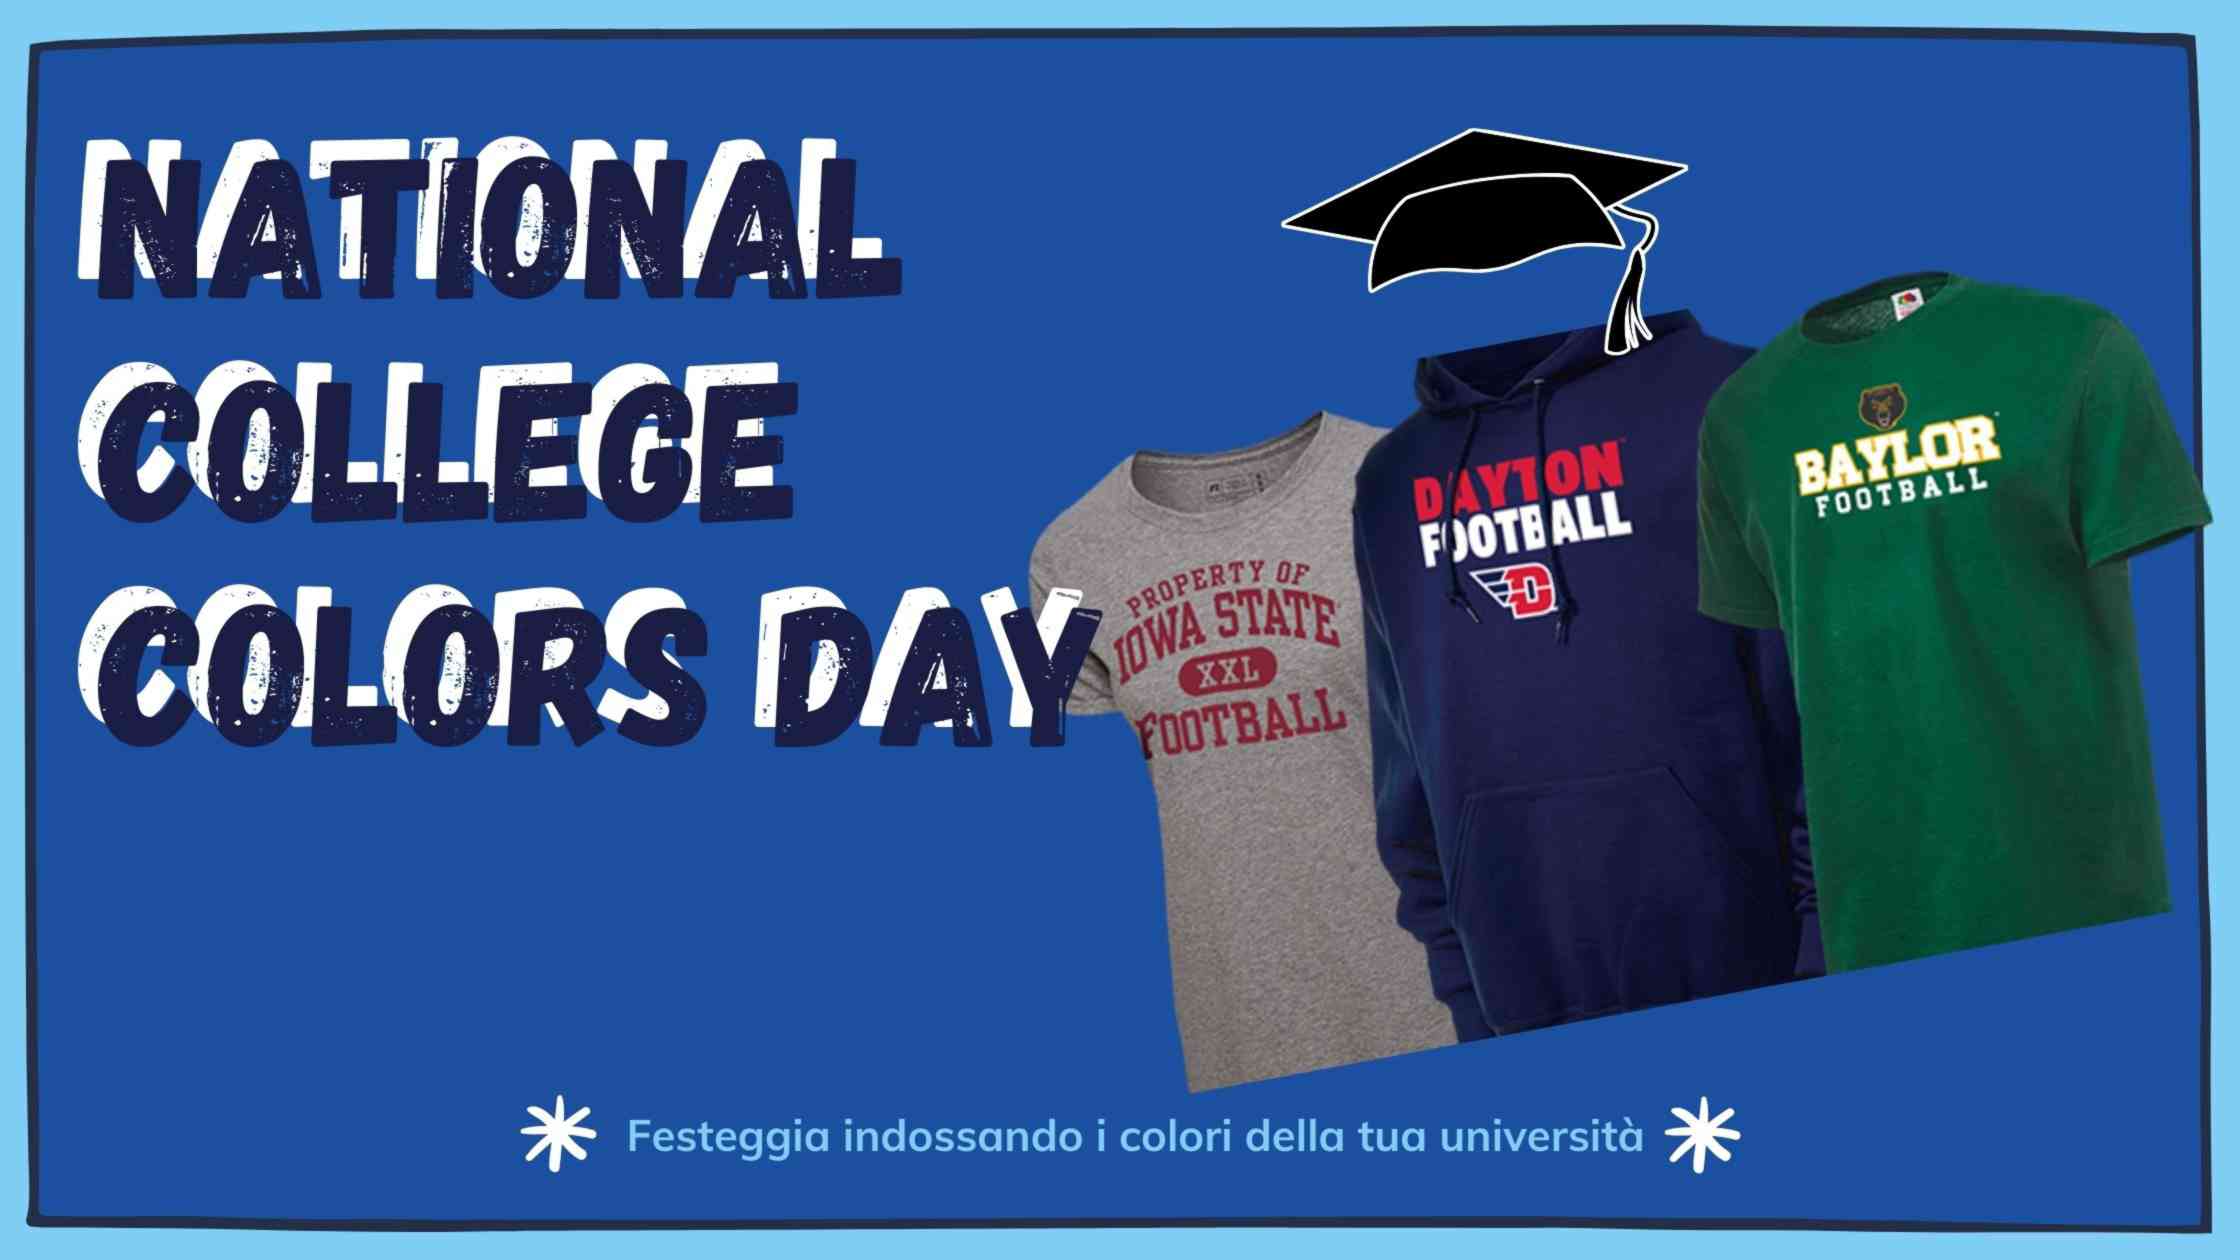 National College Day